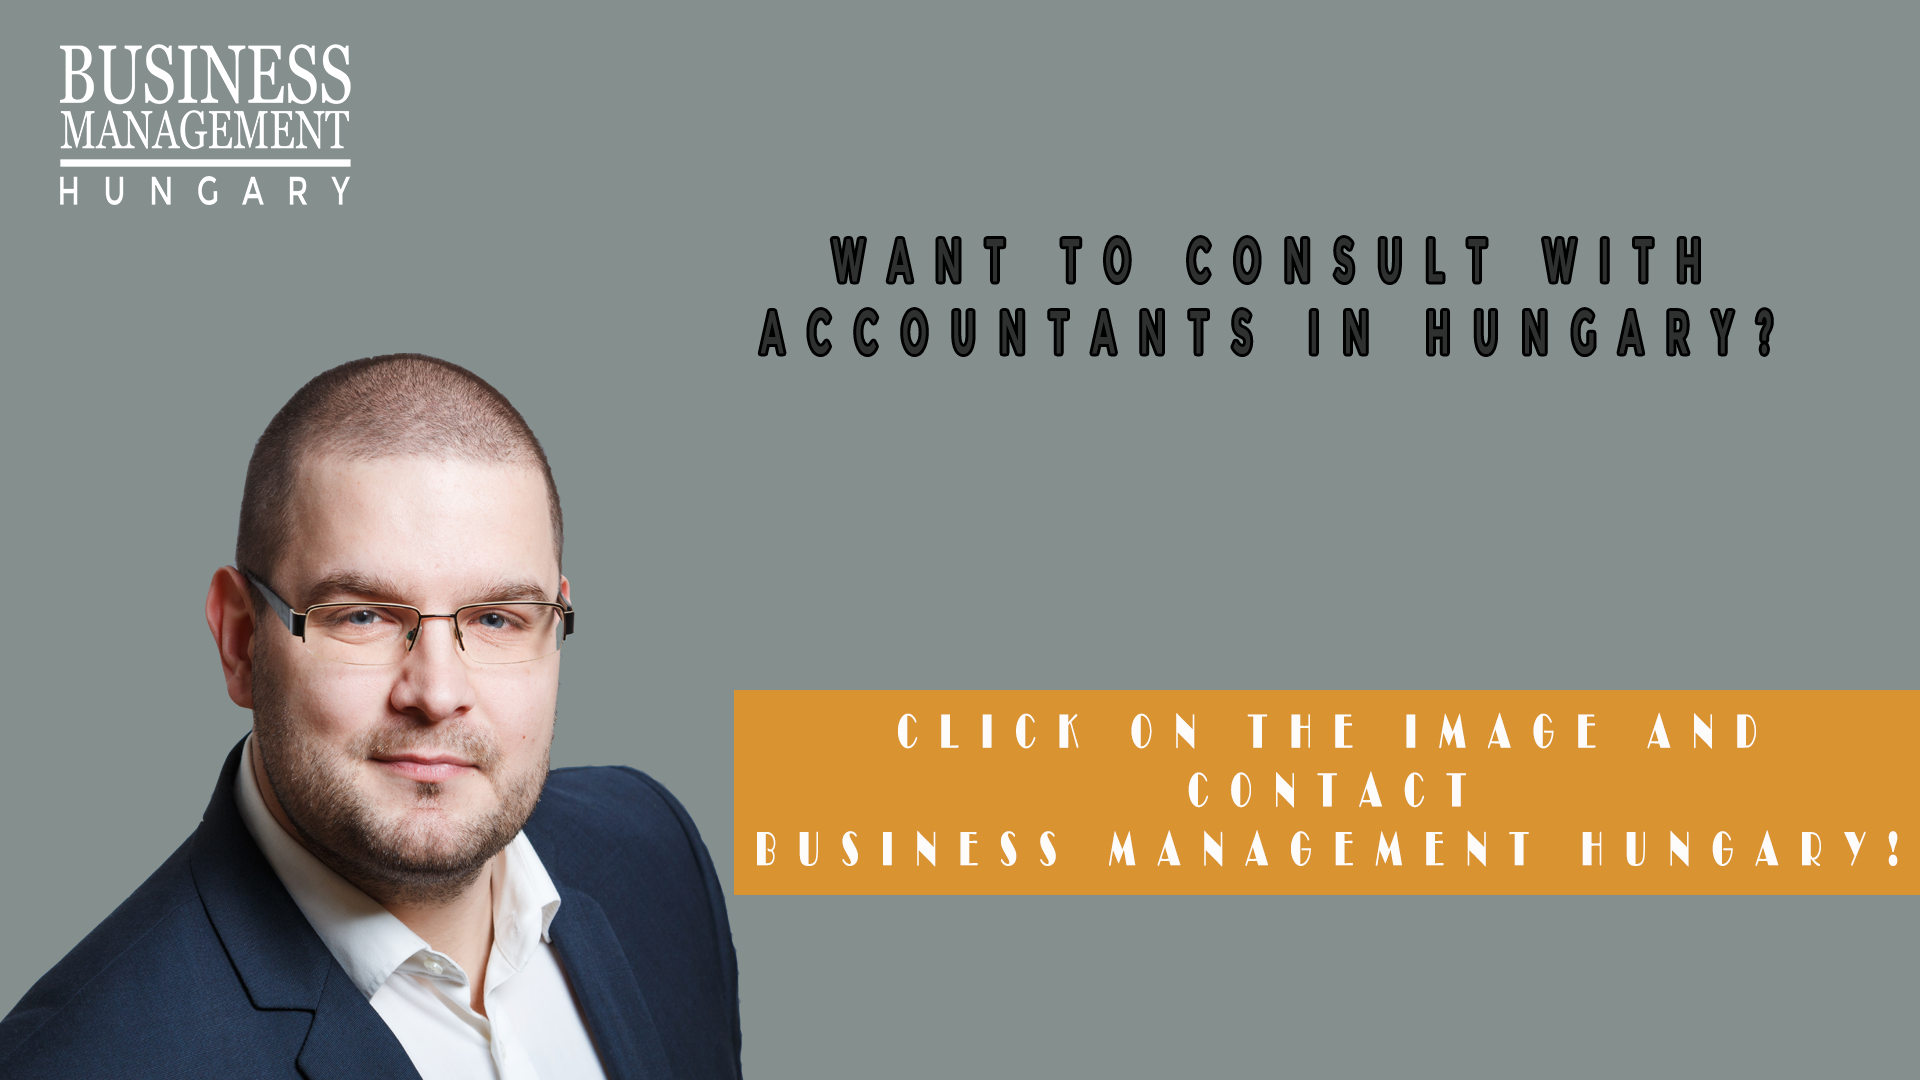 Accountants in Hungary: Contact Us